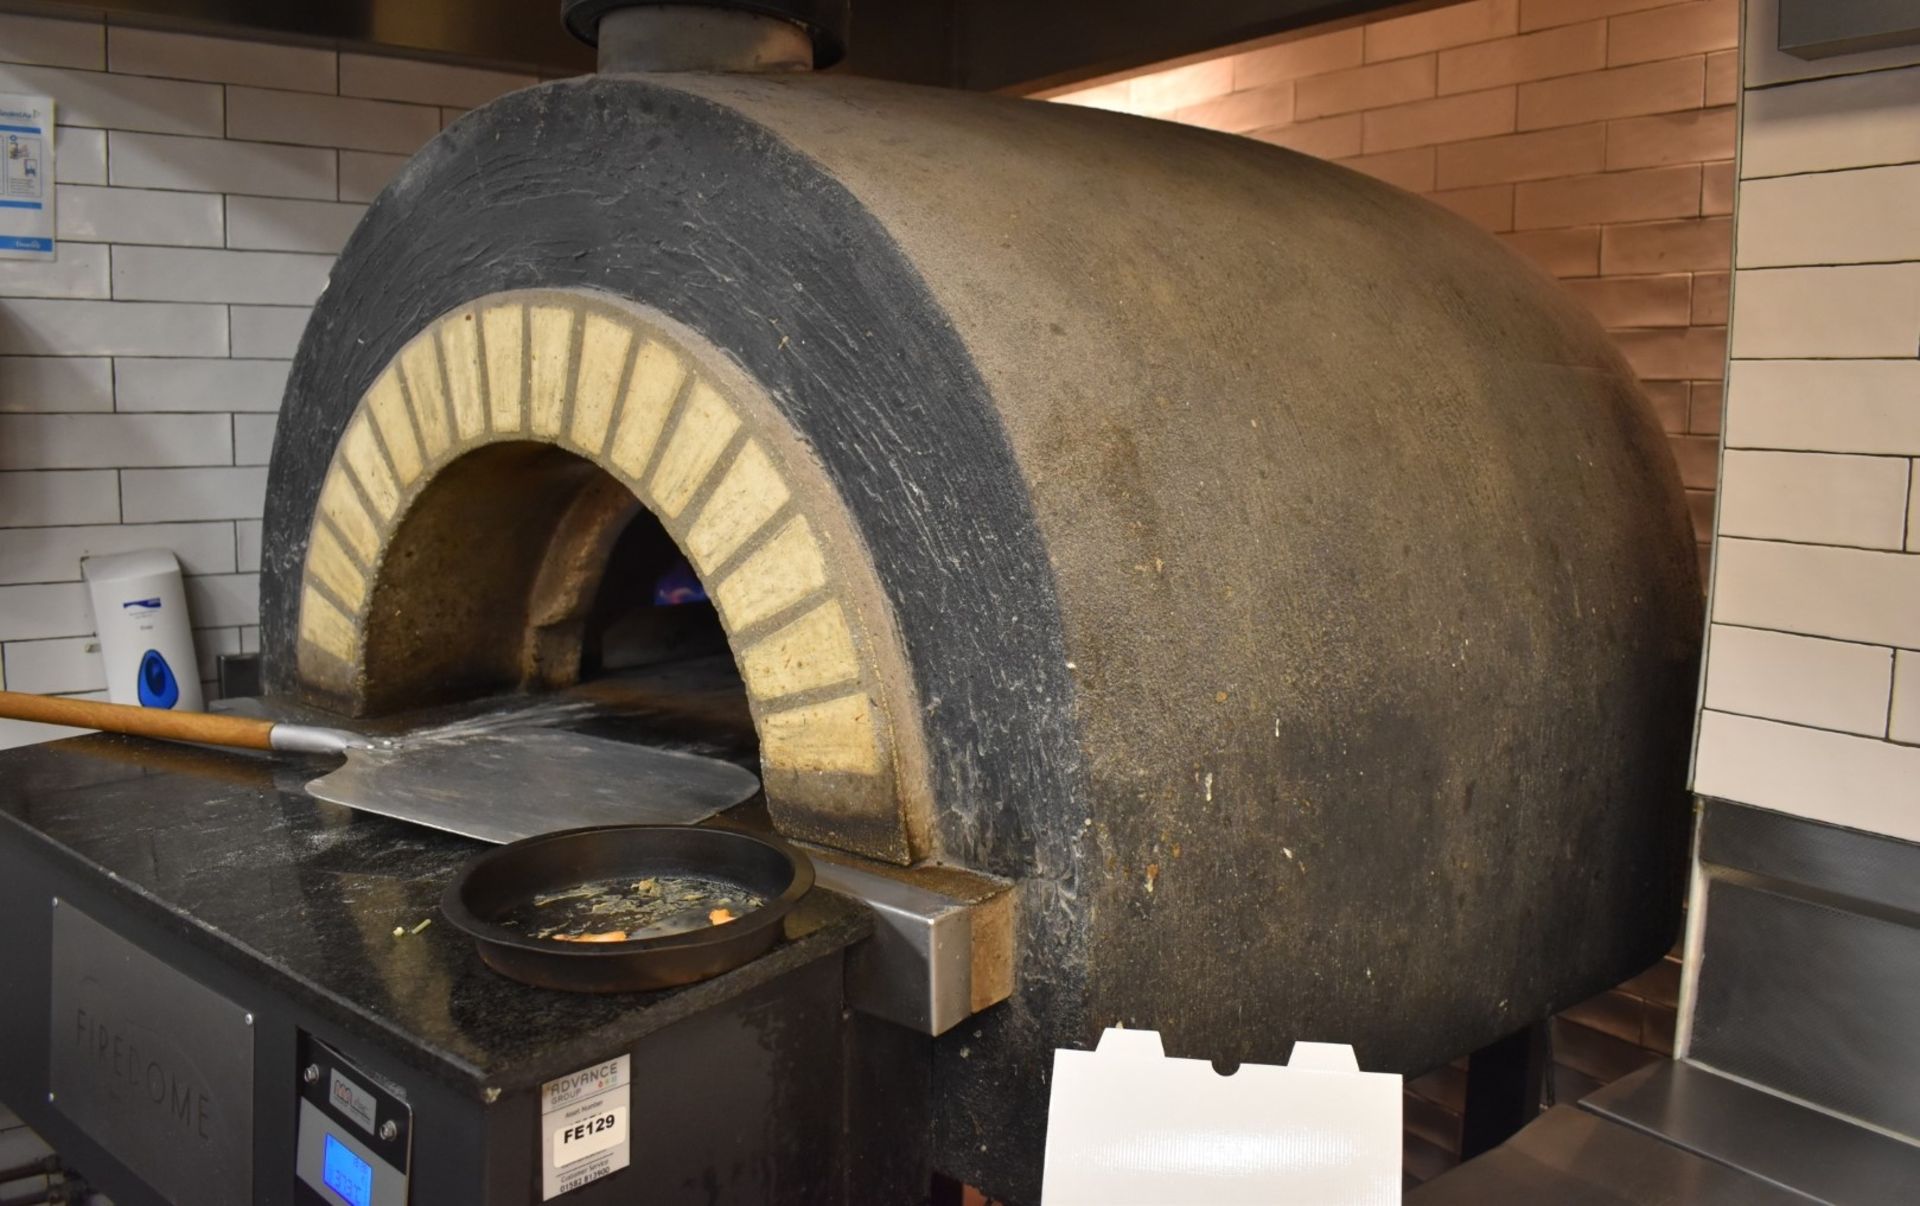 1 x MAM Firedome Commercial Stone Baked Gas Pizza Oven - Made in Italy - Type Modular Fire E - CL499 - Image 7 of 10